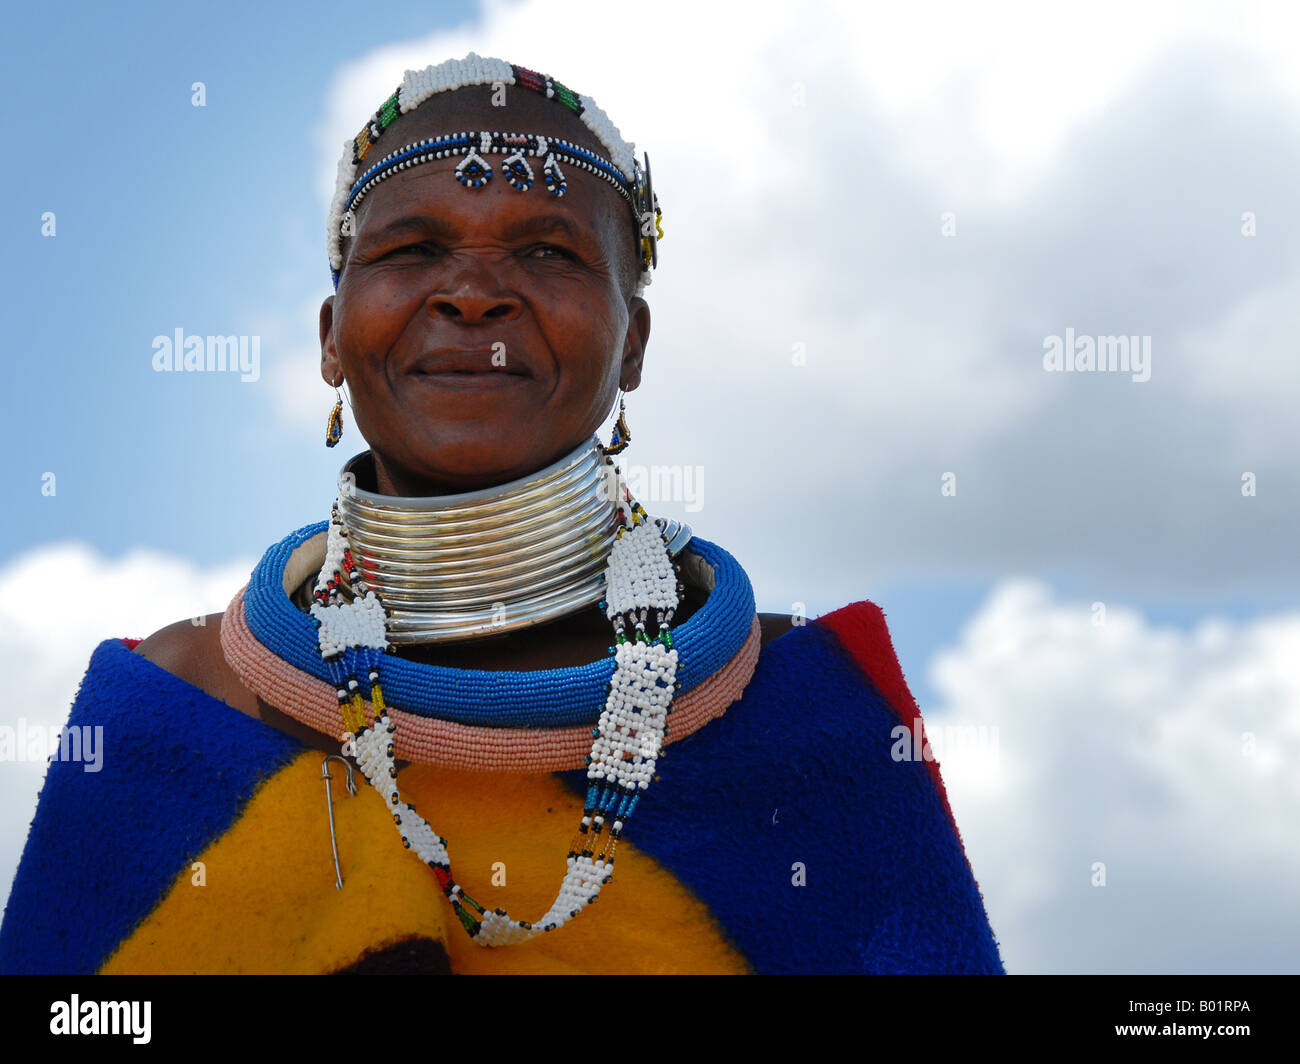 Ndebele woman in her traditional clothing in the museum village of Botshabelo in South Africa near Middelburg. Stock Photo